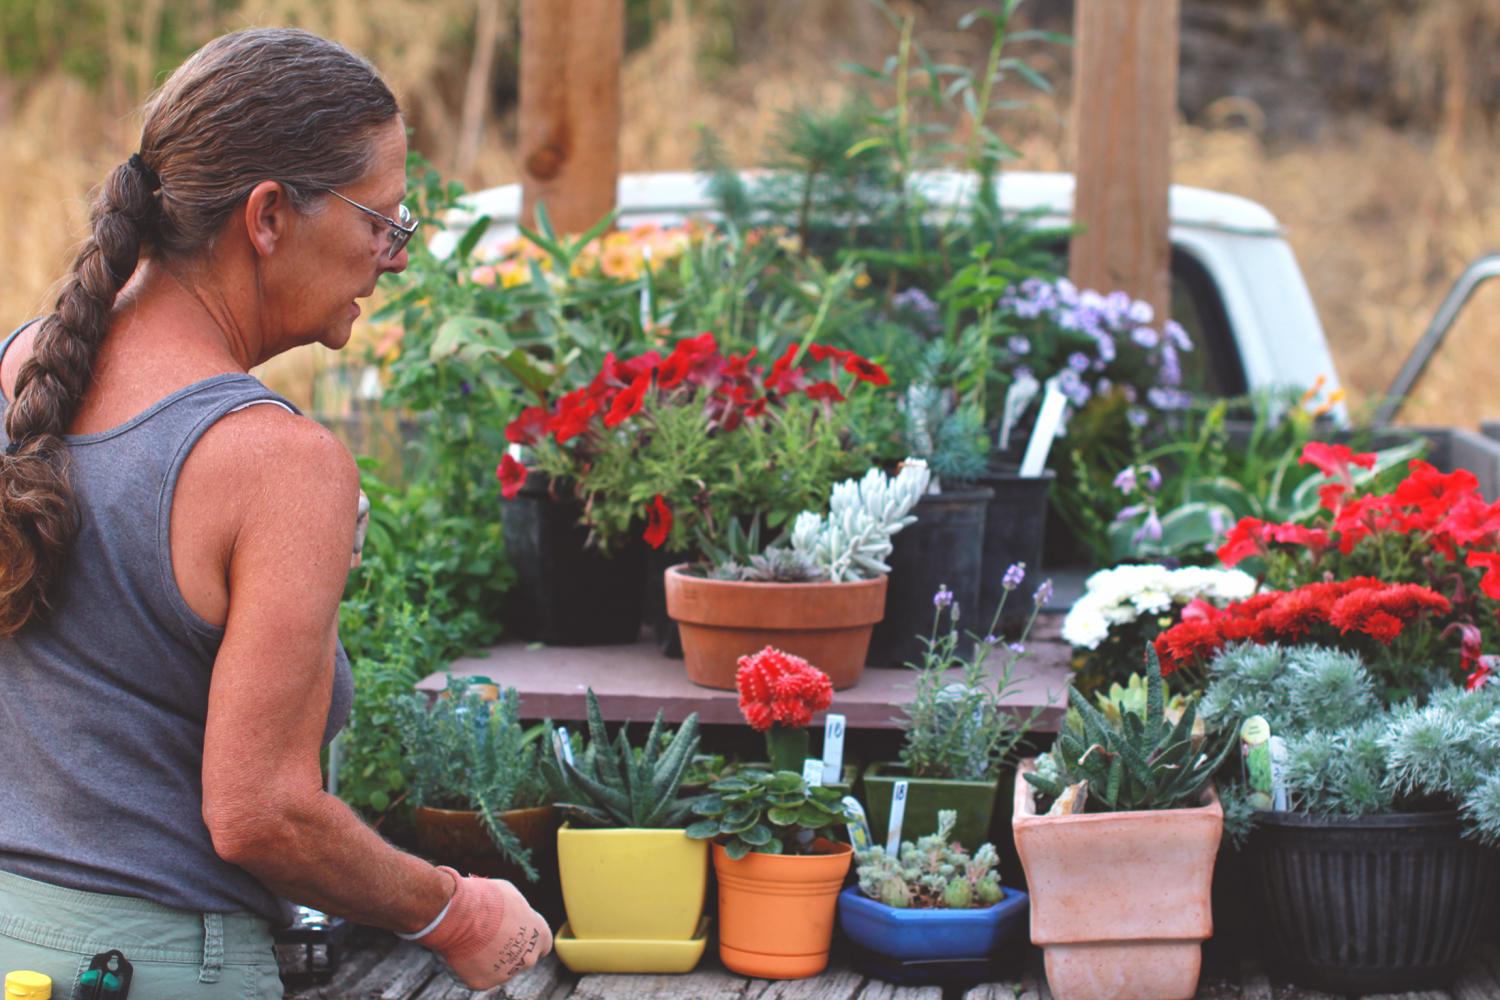 Trina Anderson show off a wide assortment of plants at the Pullman Farmers Market Wednesday.